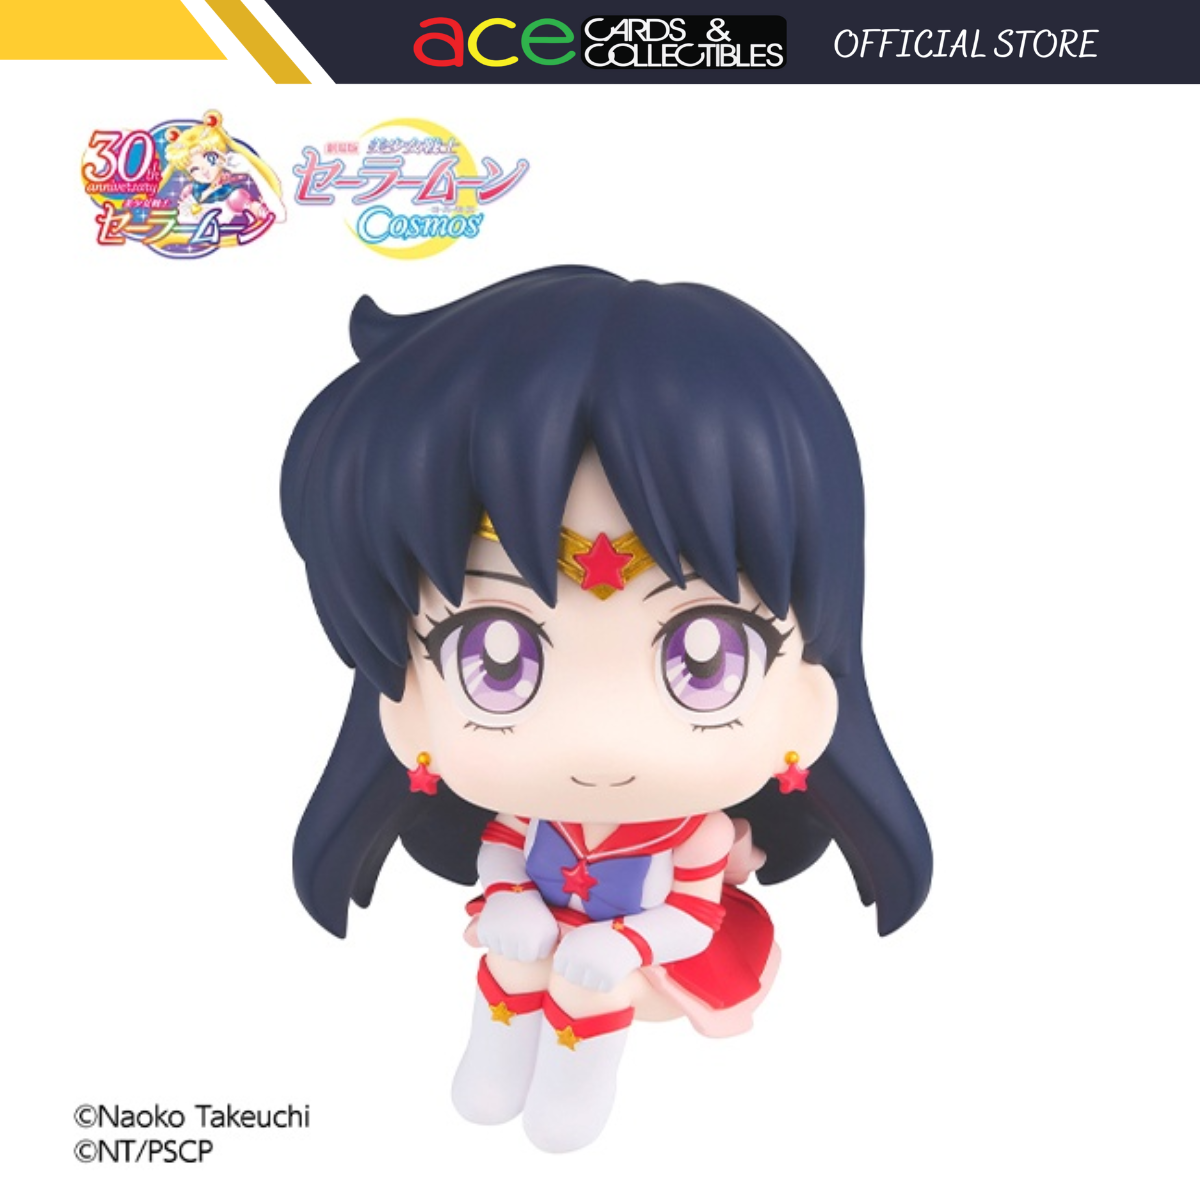 Sailor Moon Look Up Series "Eternal Sailor Mars" (Cosmos The Movie Ver.)-MegaHouse-Ace Cards & Collectibles